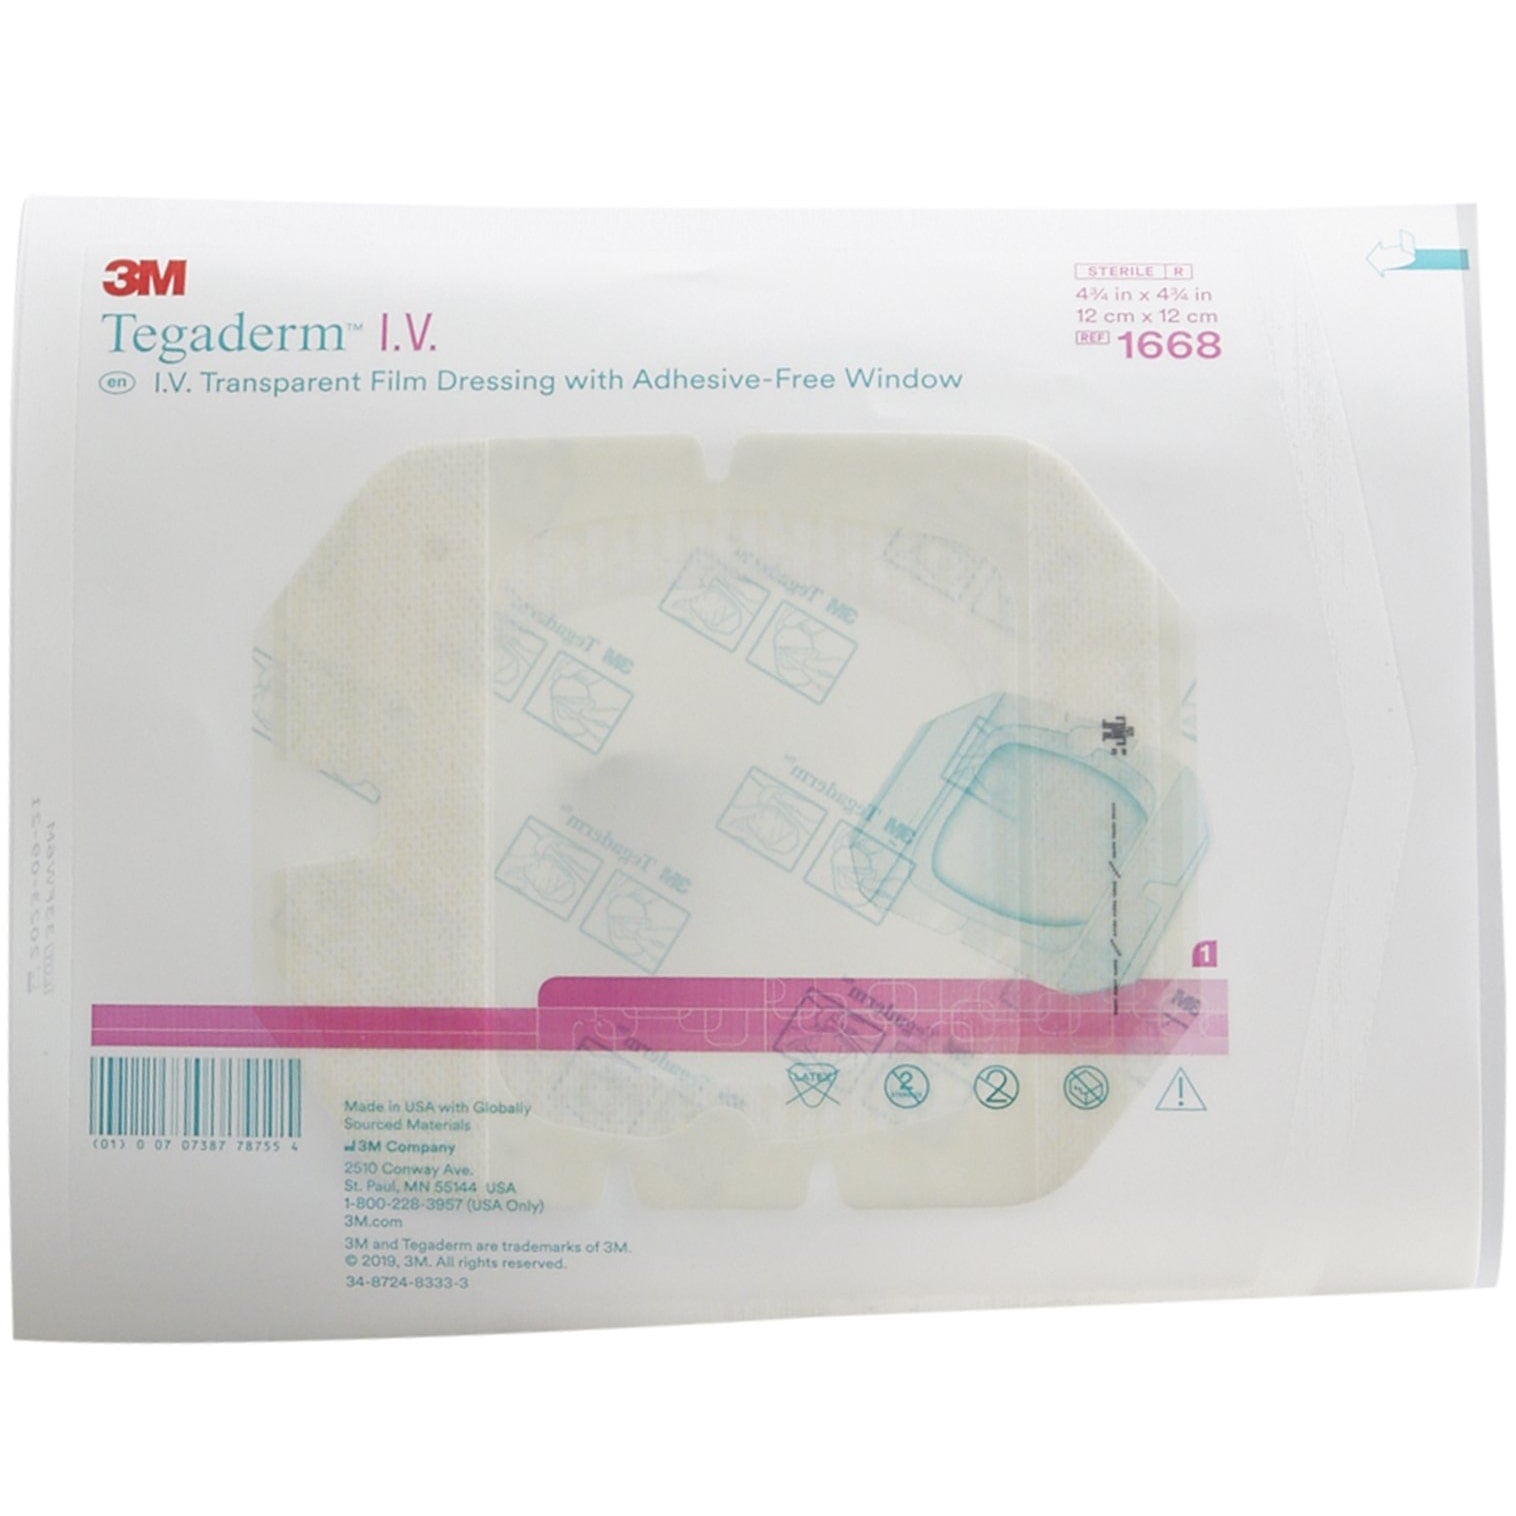 3M Tegaderm I.V. Transparent Film Dressing with Adhesive-Free Window packaging